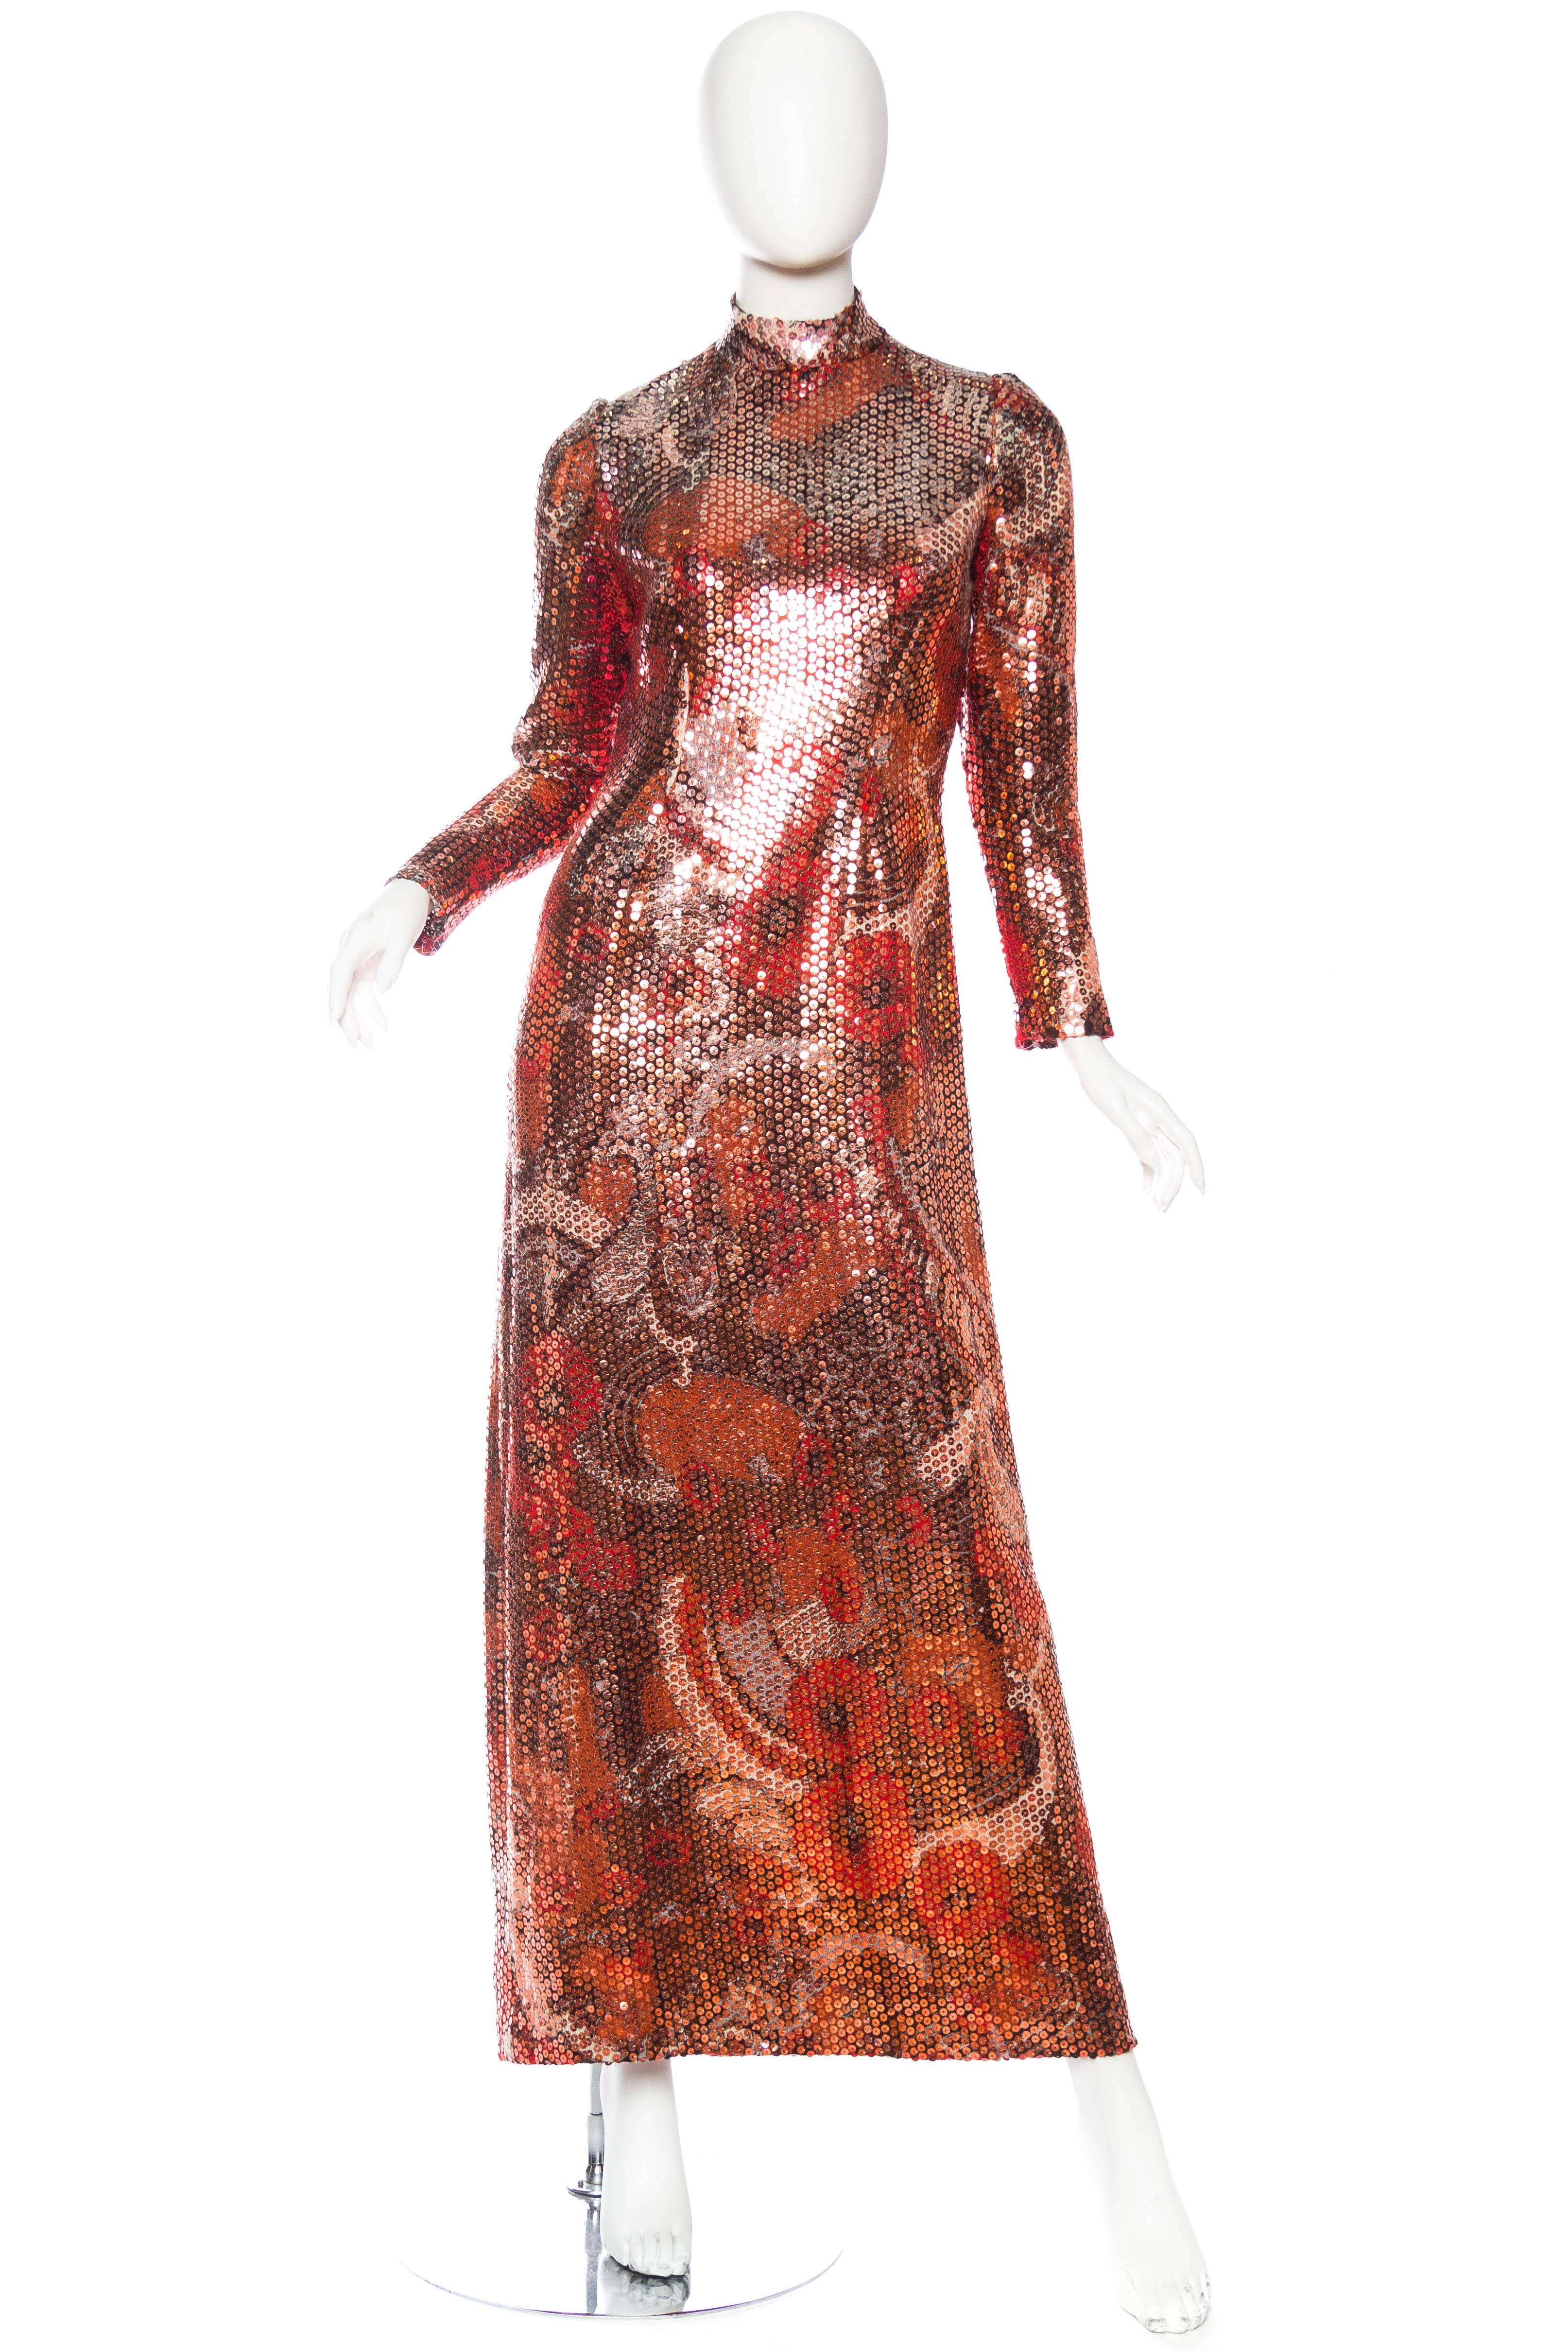 Lined in red rayon, minor sequin loss. 1970S Red & Brown Wool Psychedelic Floral Anne Fogarty Sequined Sleeved Gown 